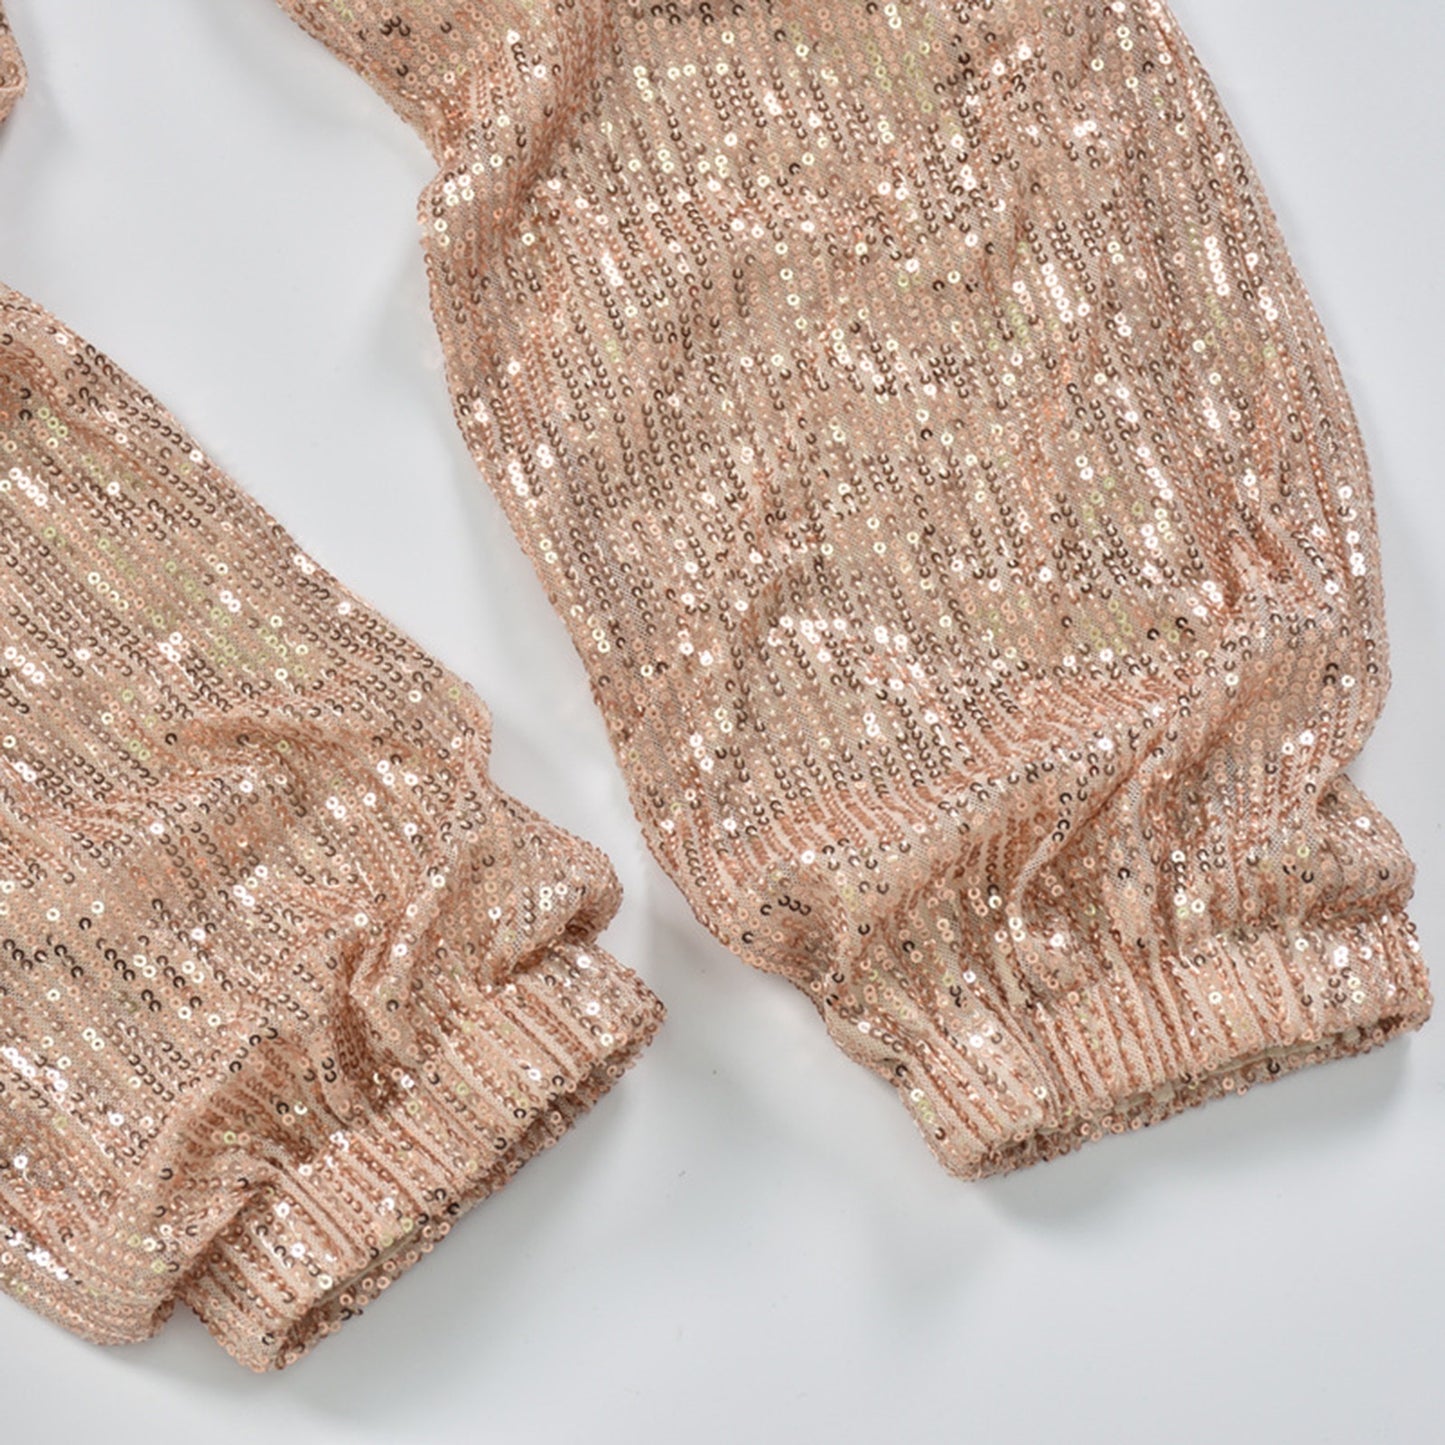 Gold/ Black Sequin Trousers With Elasticated Ankle and Waist